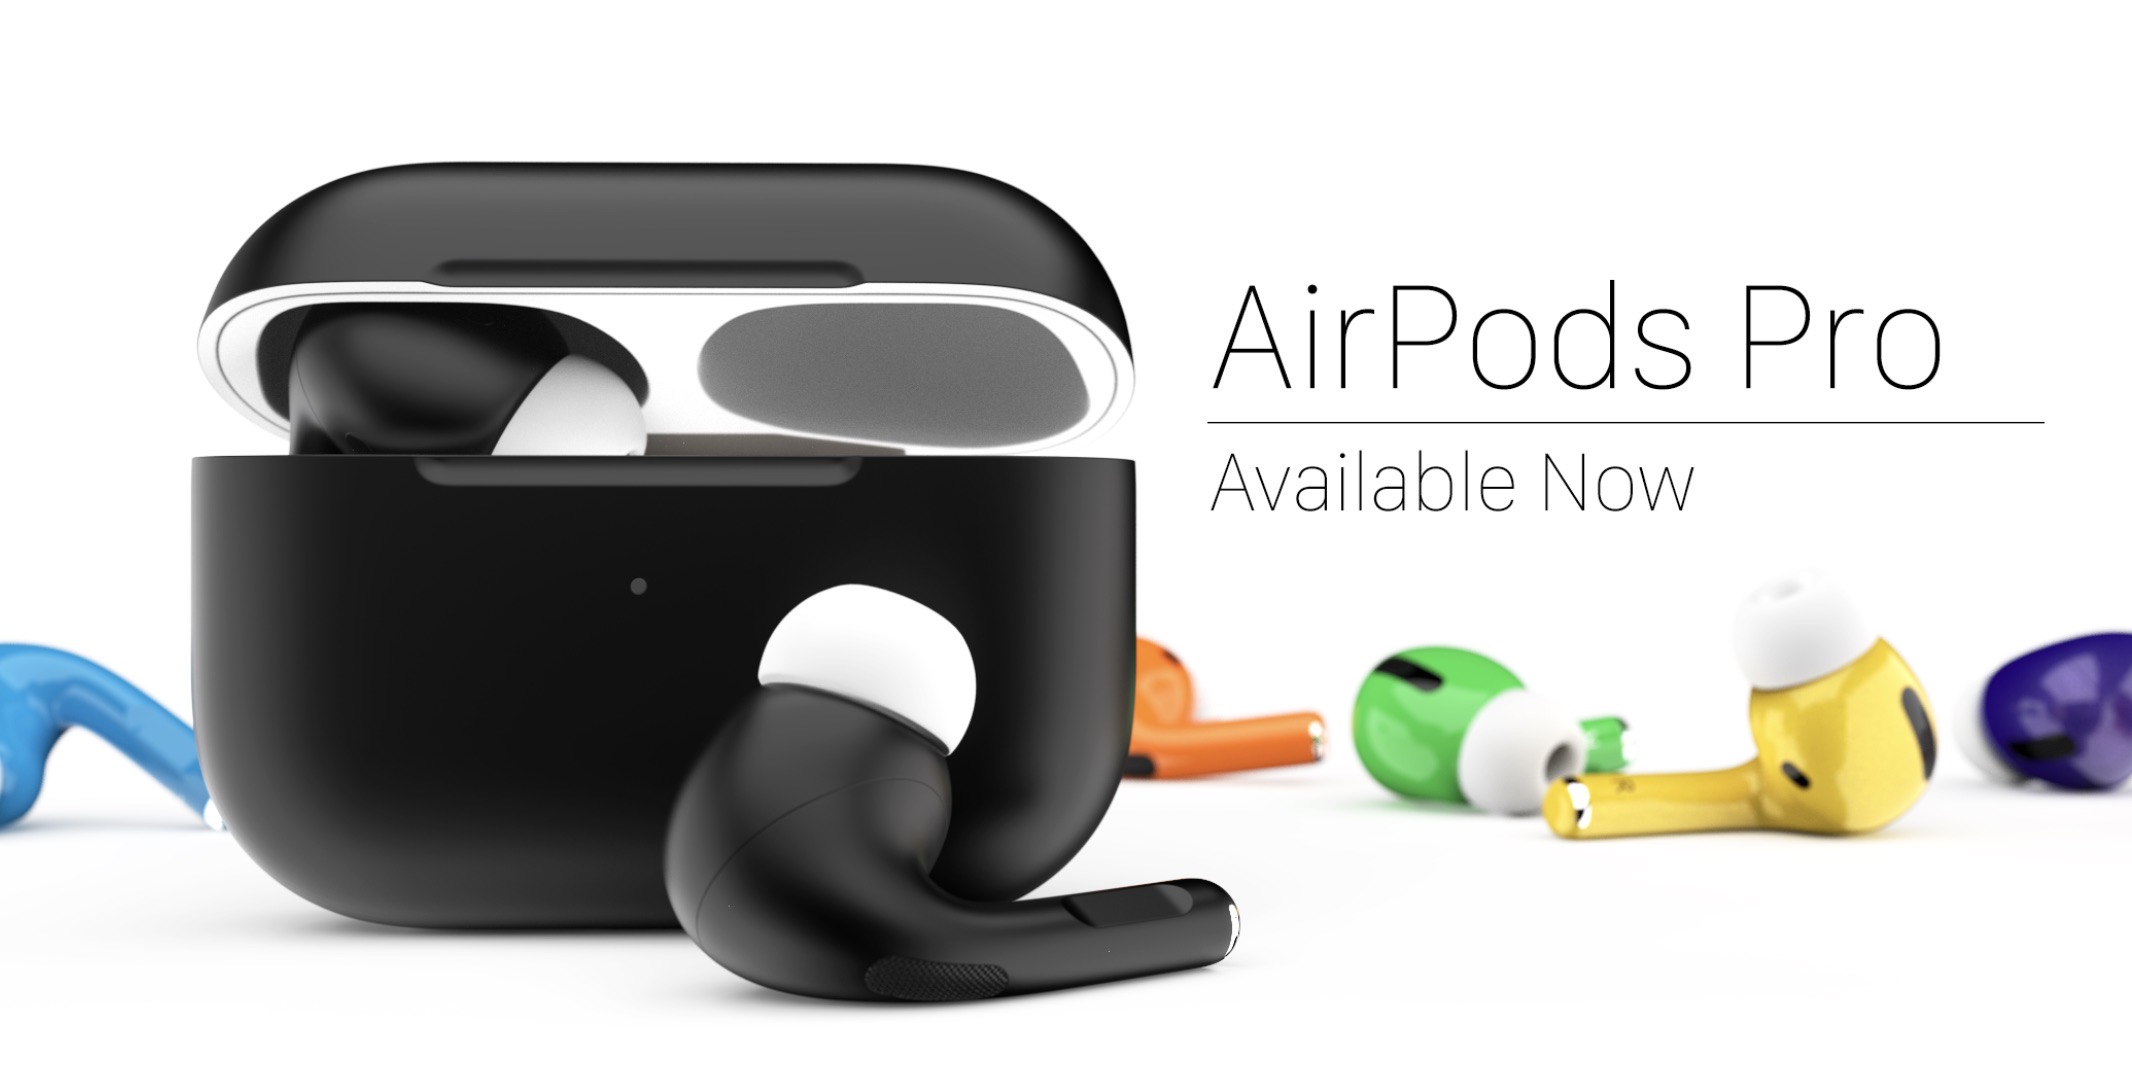 ColorWare brings color to AirPods Pro w/ matte and glossy custom